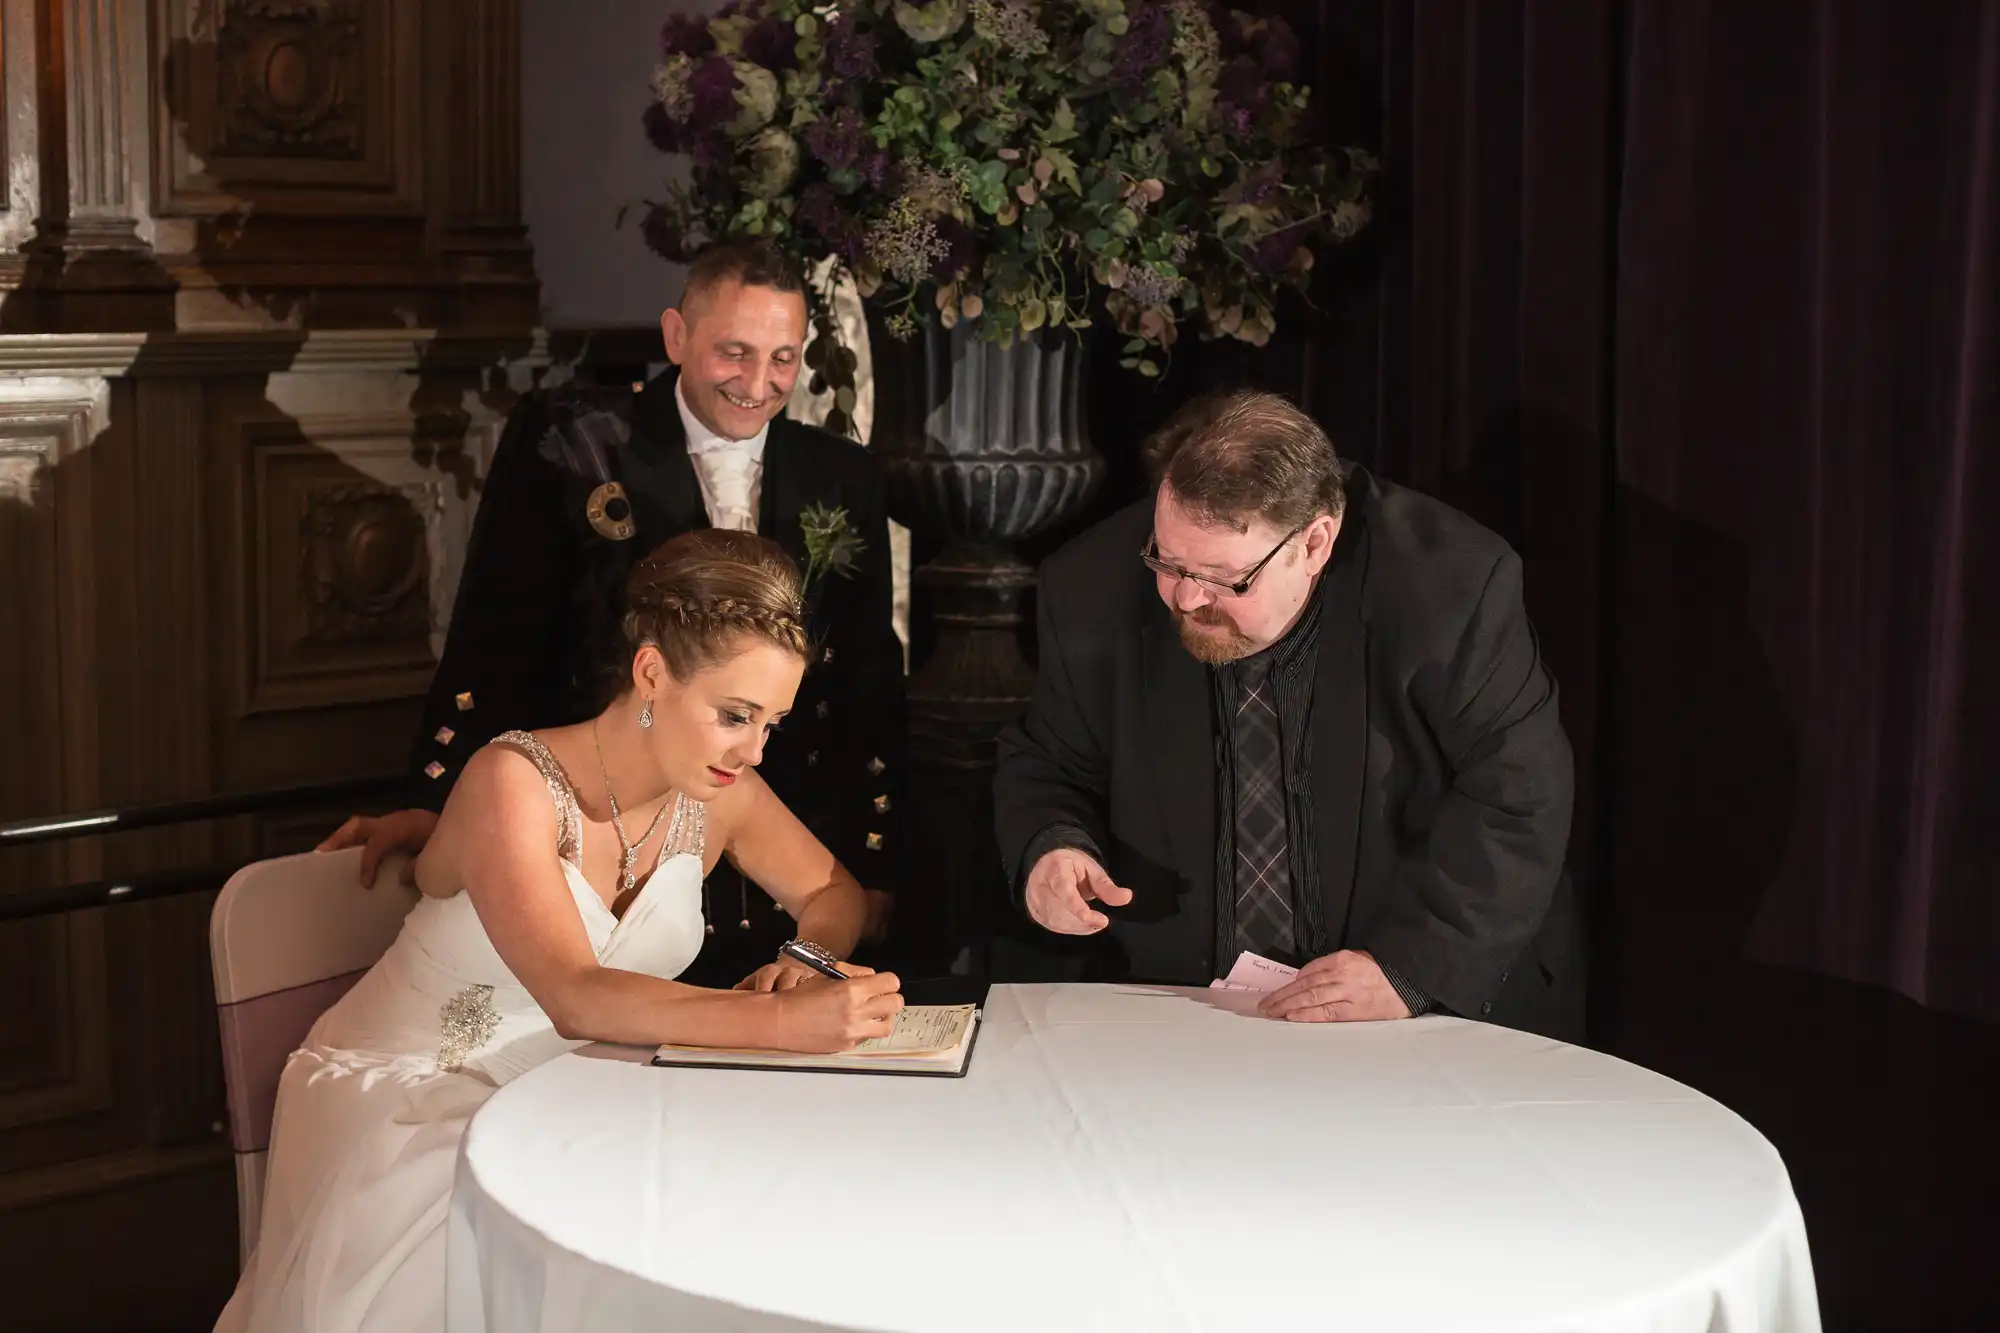 A bride and groom sign a document at a table, with a smiling officiant standing behind them in a dimly lit room decorated with flowers.